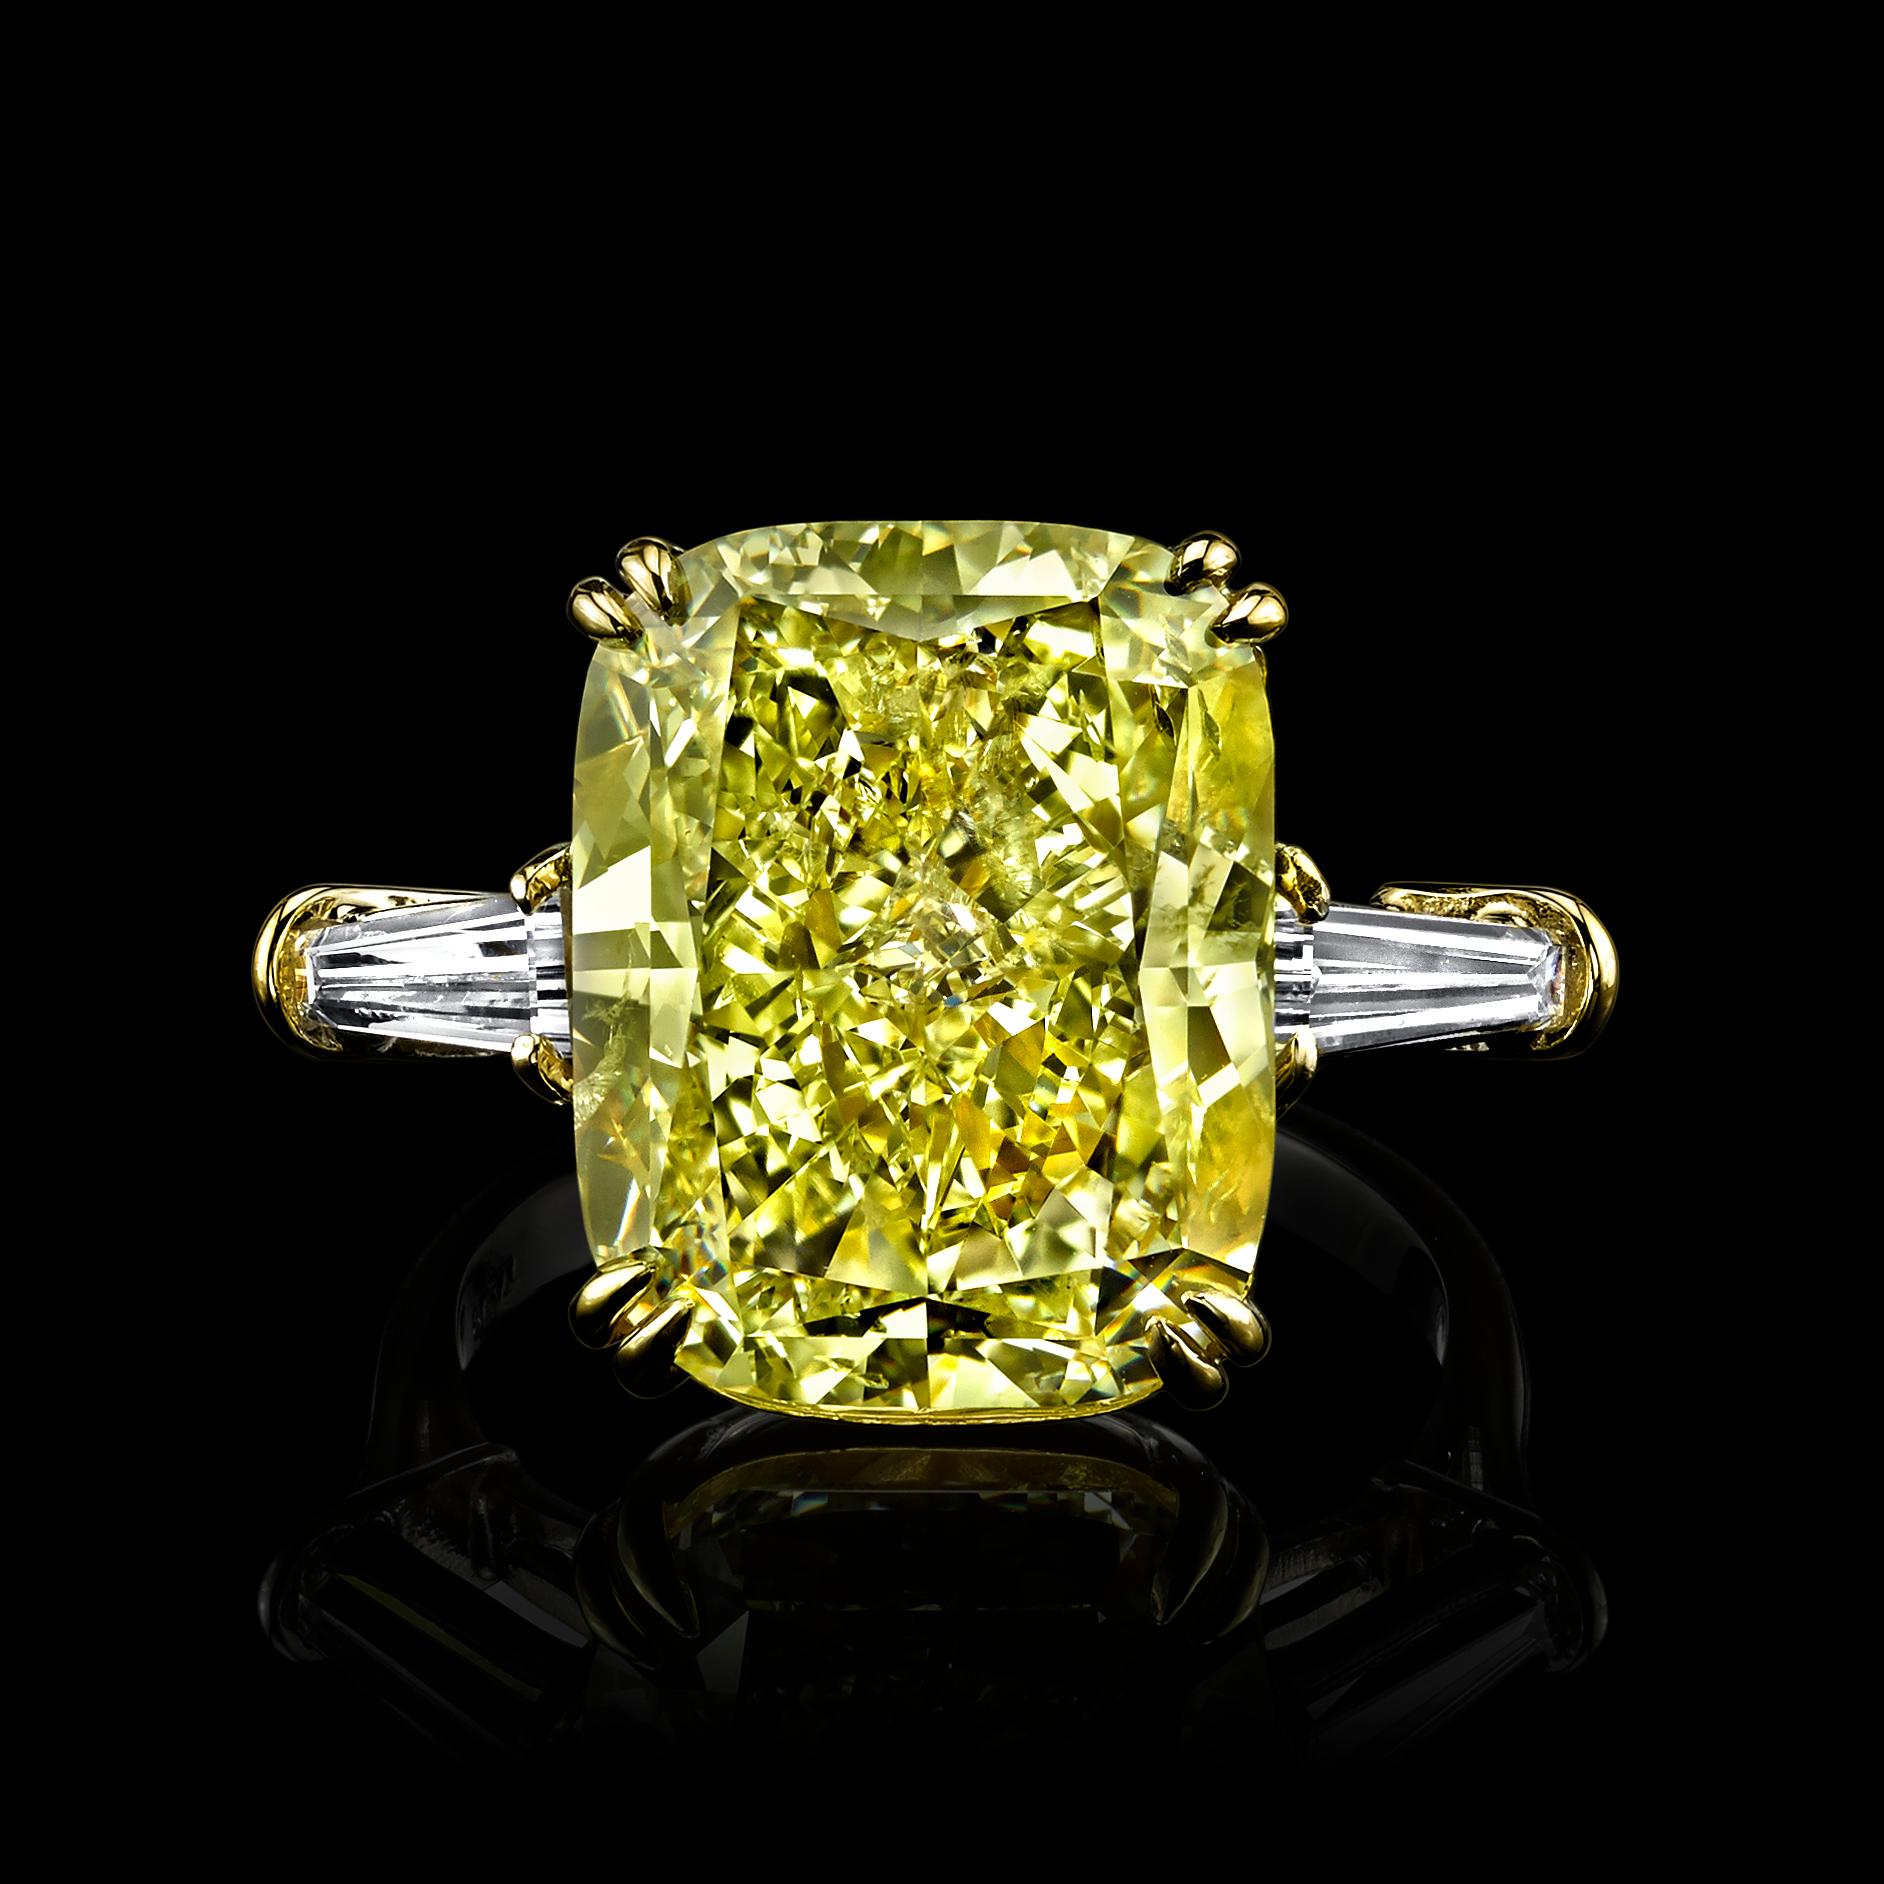 Contemporary GIA Certified 17.49 Carat Cushion Cut Fancy Light Yellow Diamond Ring For Sale